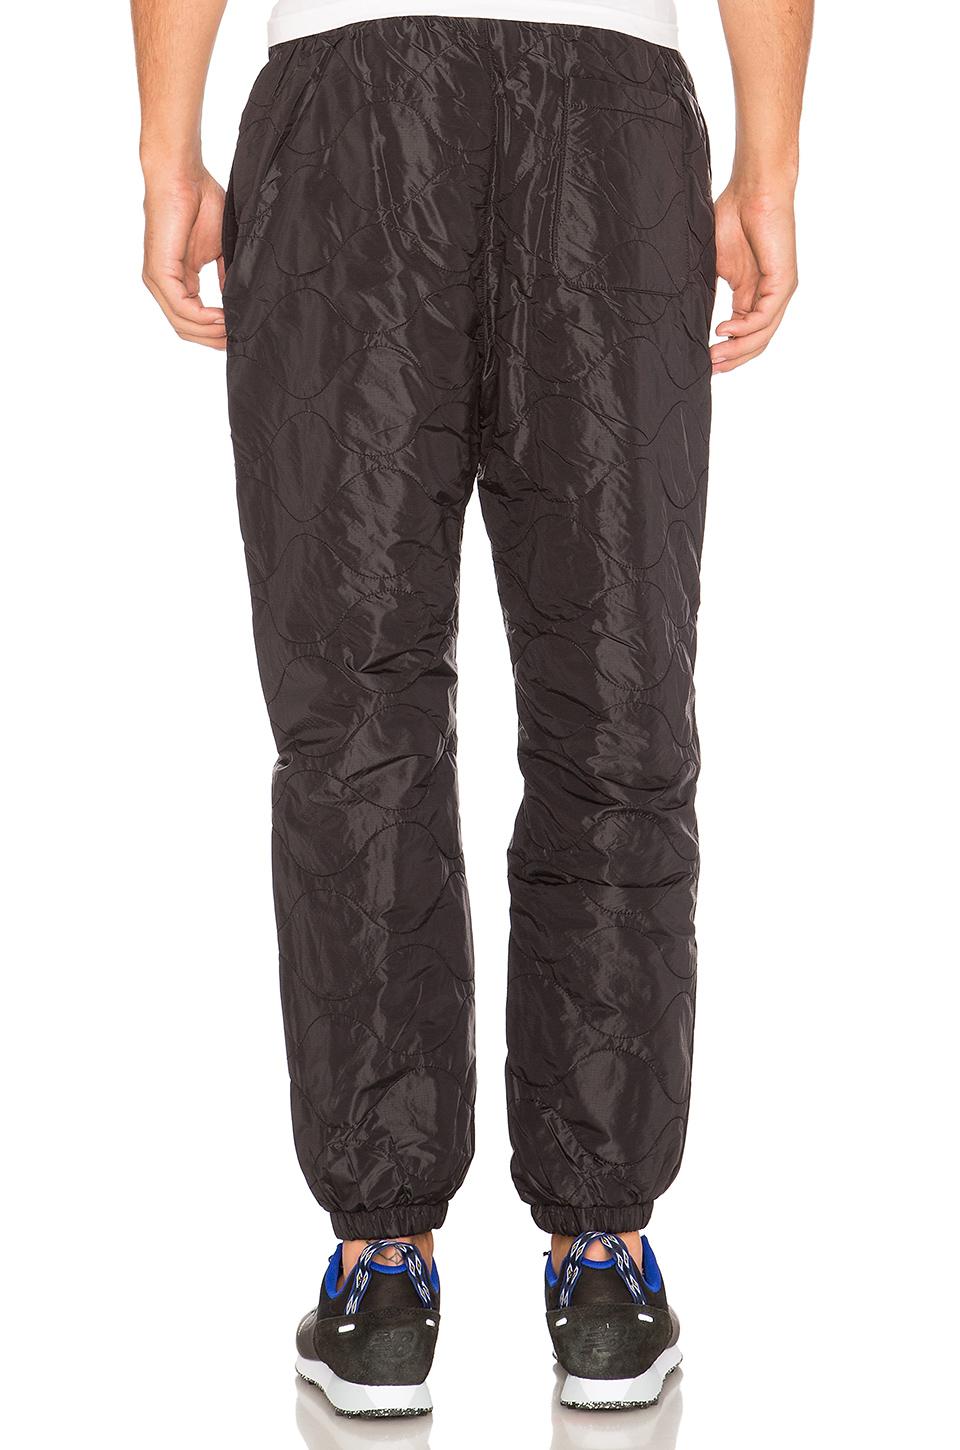 Stussy Synthetic Quilted Pant in Black for Men - Lyst